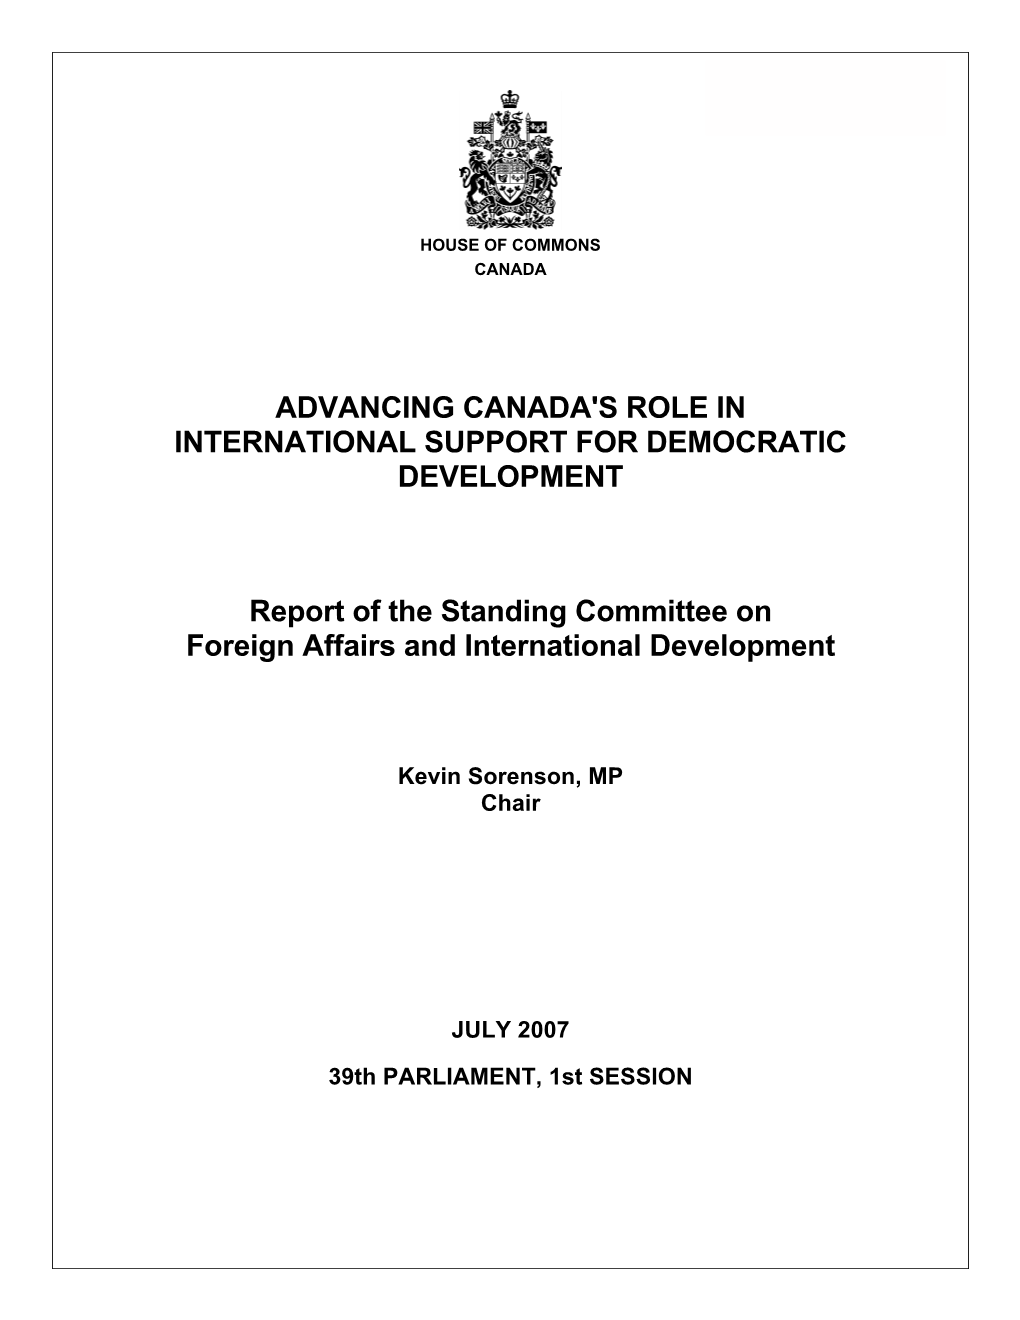 Advancing Canada's Role in International Support for Democratic Development